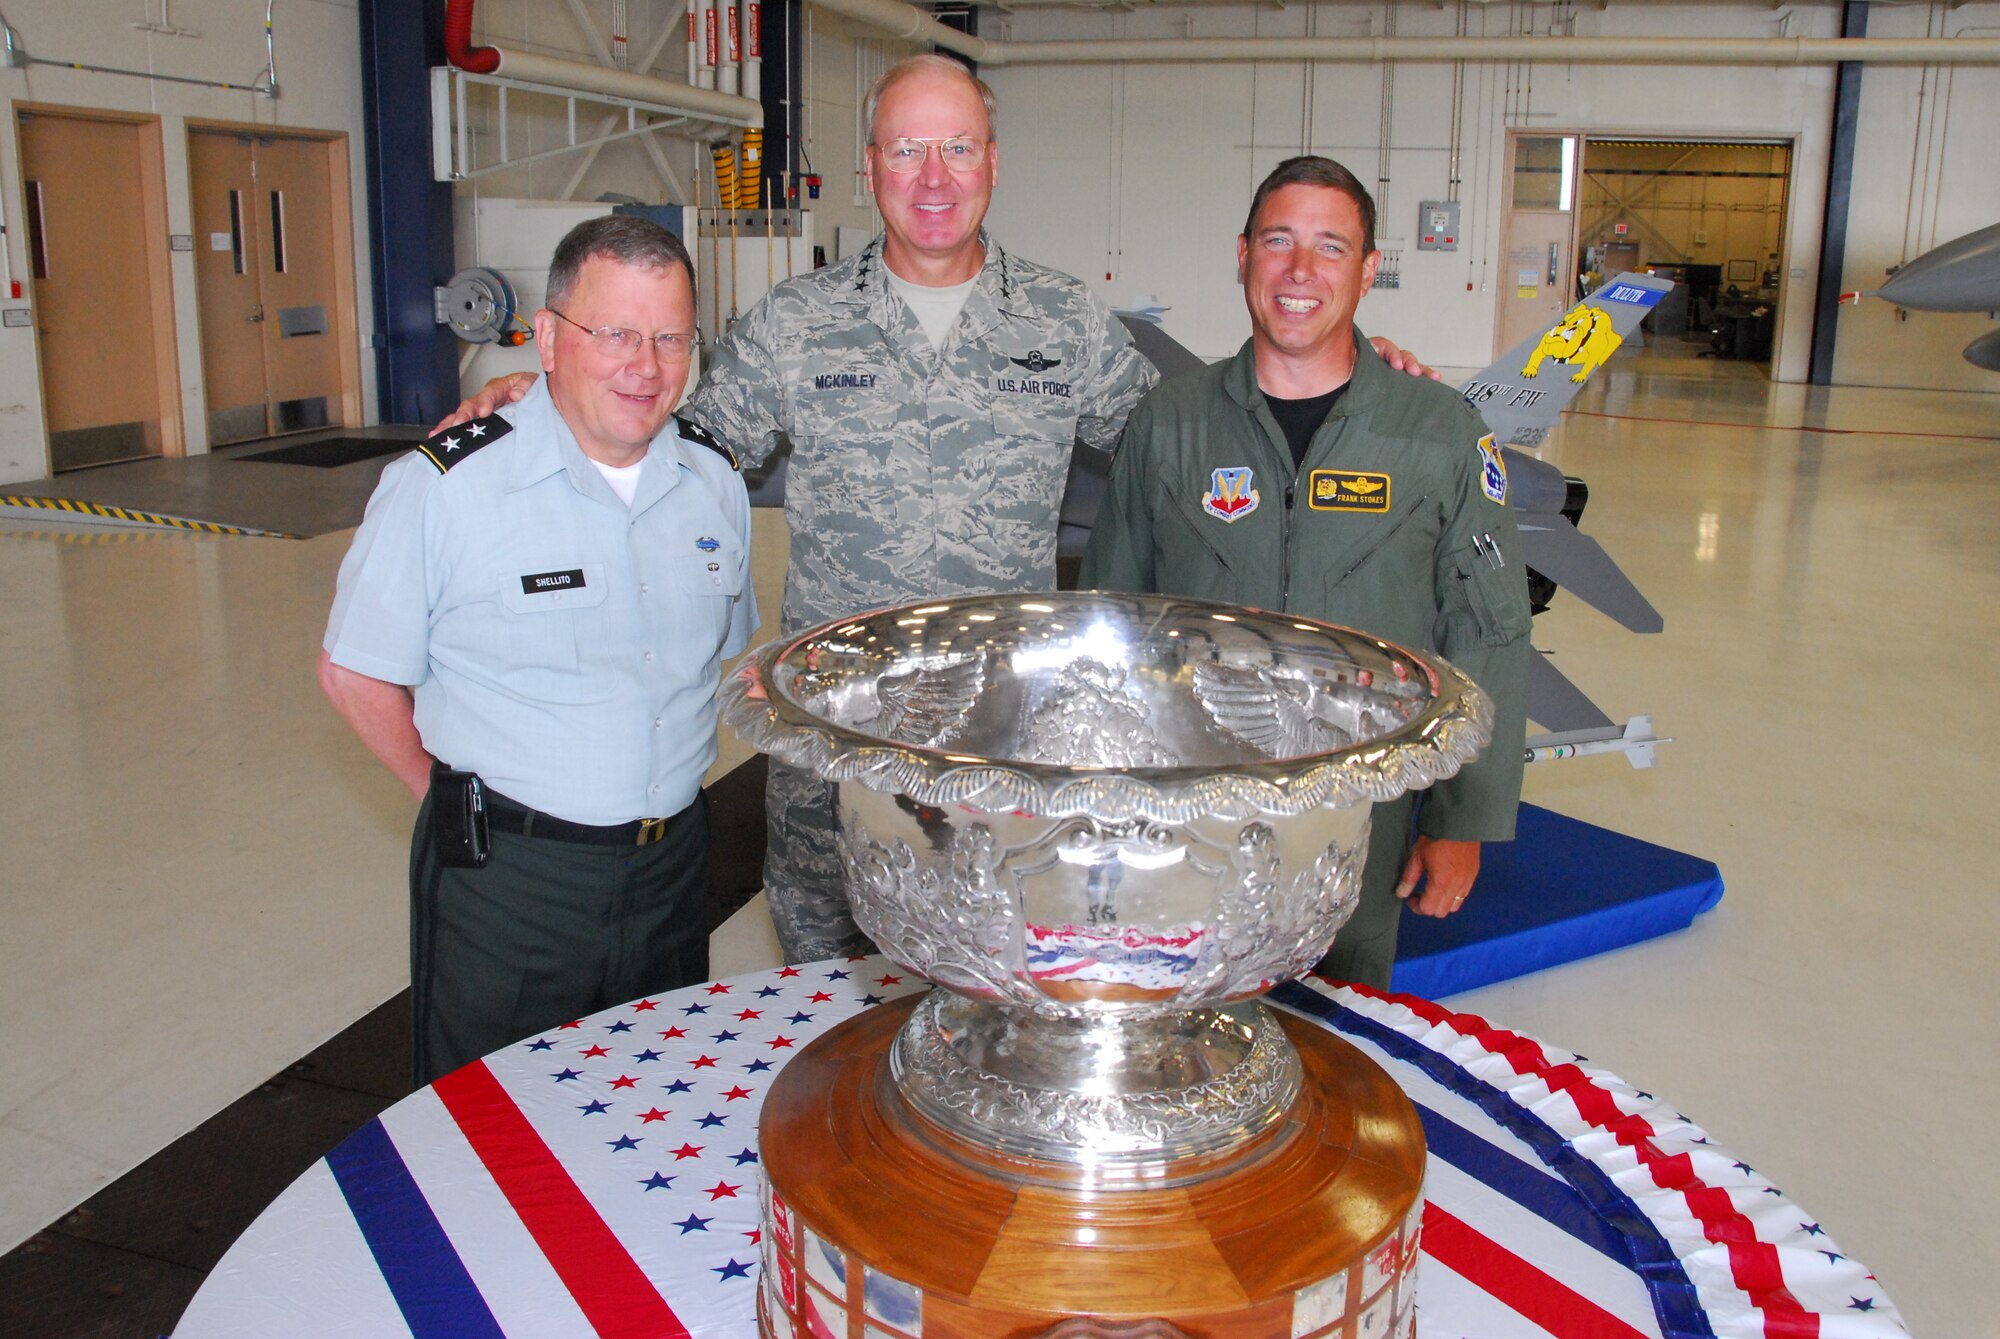 U.S. Army Major General Larry Shellito (left), Adjutant General of the Minnesota National Guard, and U.S. Air Force Col. Frank Stokes (right), Commander of the 148th Fighter Wing, Duluth, Minn., poses with General Craig R. McKinley-Chief, National Guard Bureau, as he attends a celebration at the wing for the Raytheon Trophy presentation July 31, 2009 in Duluth, Minn.  The Raytheon Trophy was awarded to the 179th Fighter Squadron of the 148th Fighter Wing as the most outstanding air defense unit in the U.S. Air Force, marking only the fourth time an Air National Guard unit received this award since its inception in 1953.  (U.S. Air Force photo by Tech. Sgt. Brett R. Ewald)